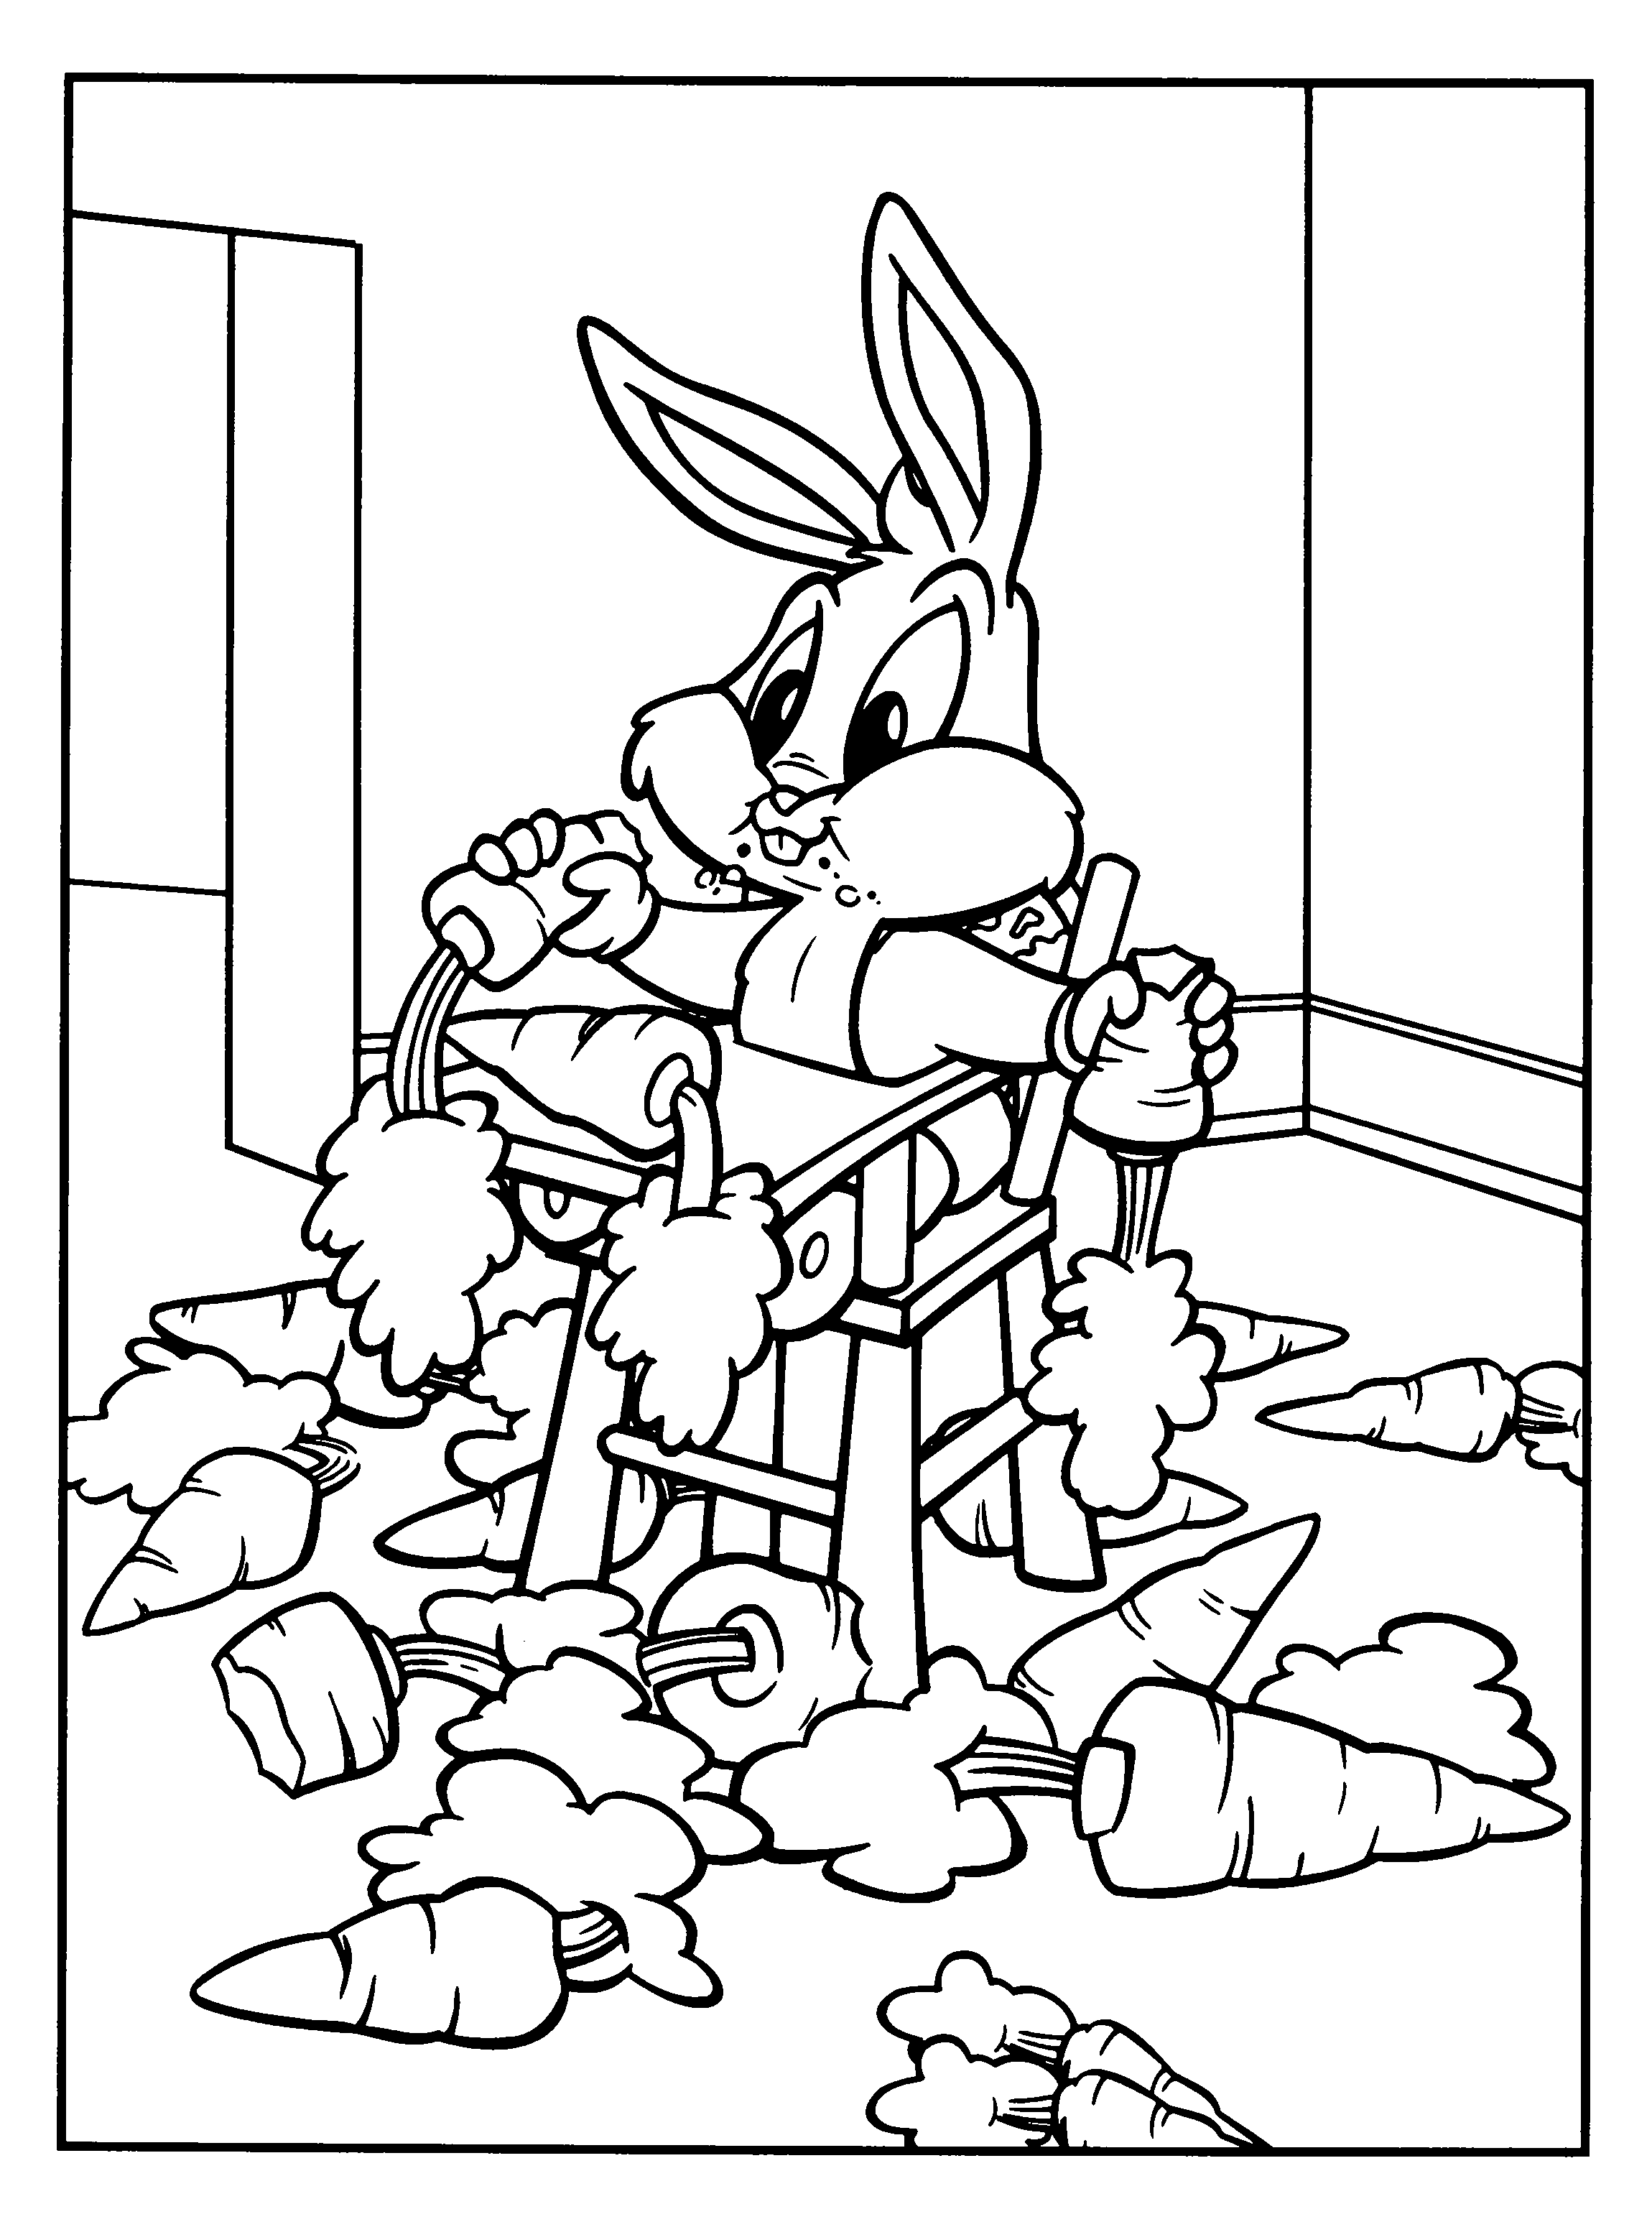 looney tunes colouring pages looney tunes lola coloring page free printable coloring colouring pages tunes looney 